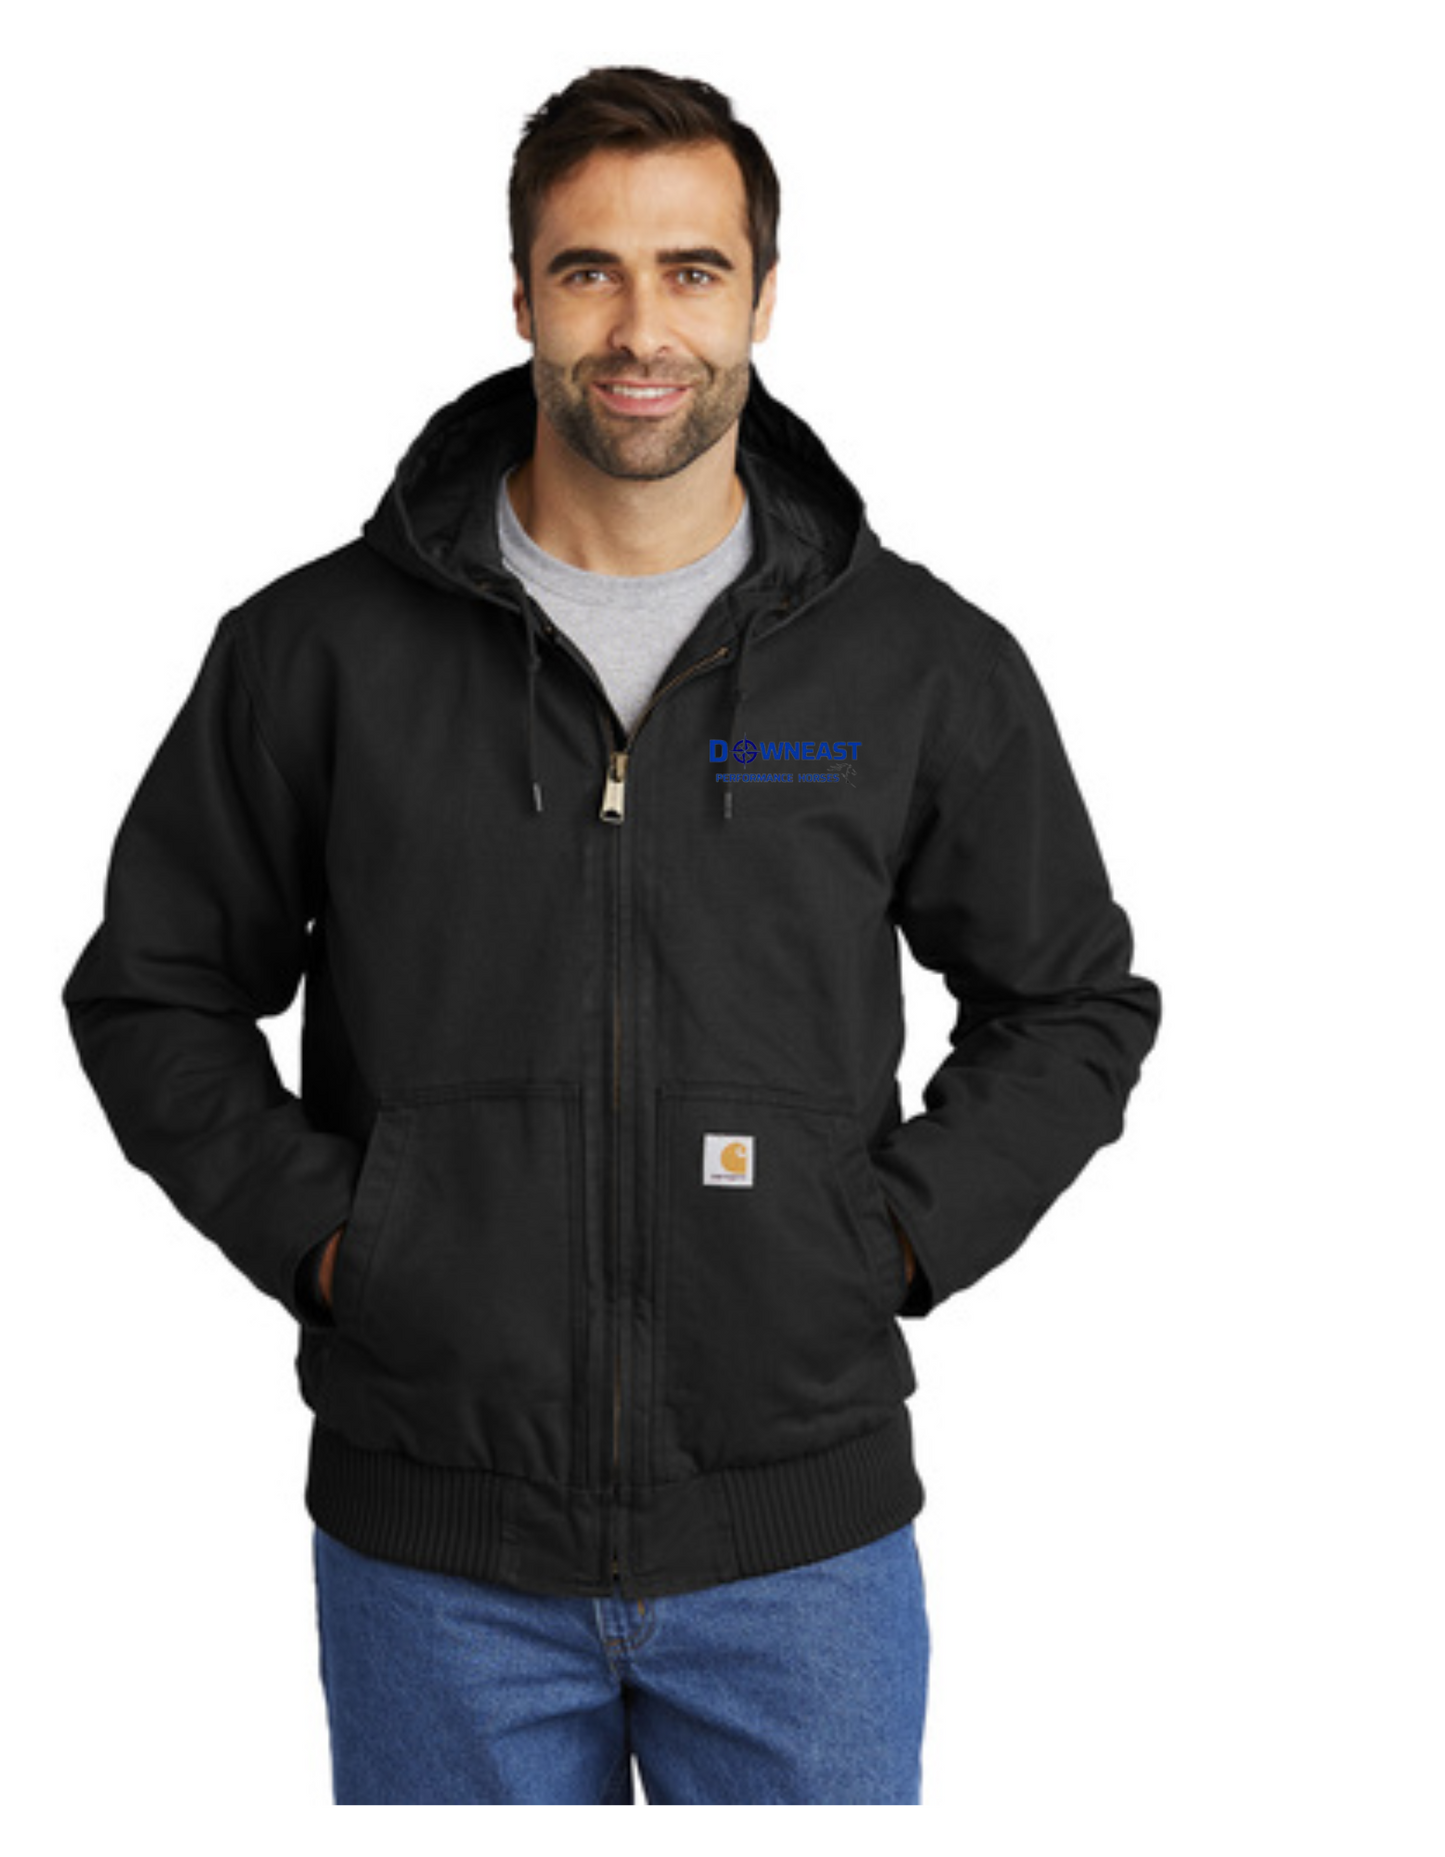 Downeast - Carhartt® Washed Duck Active Jac